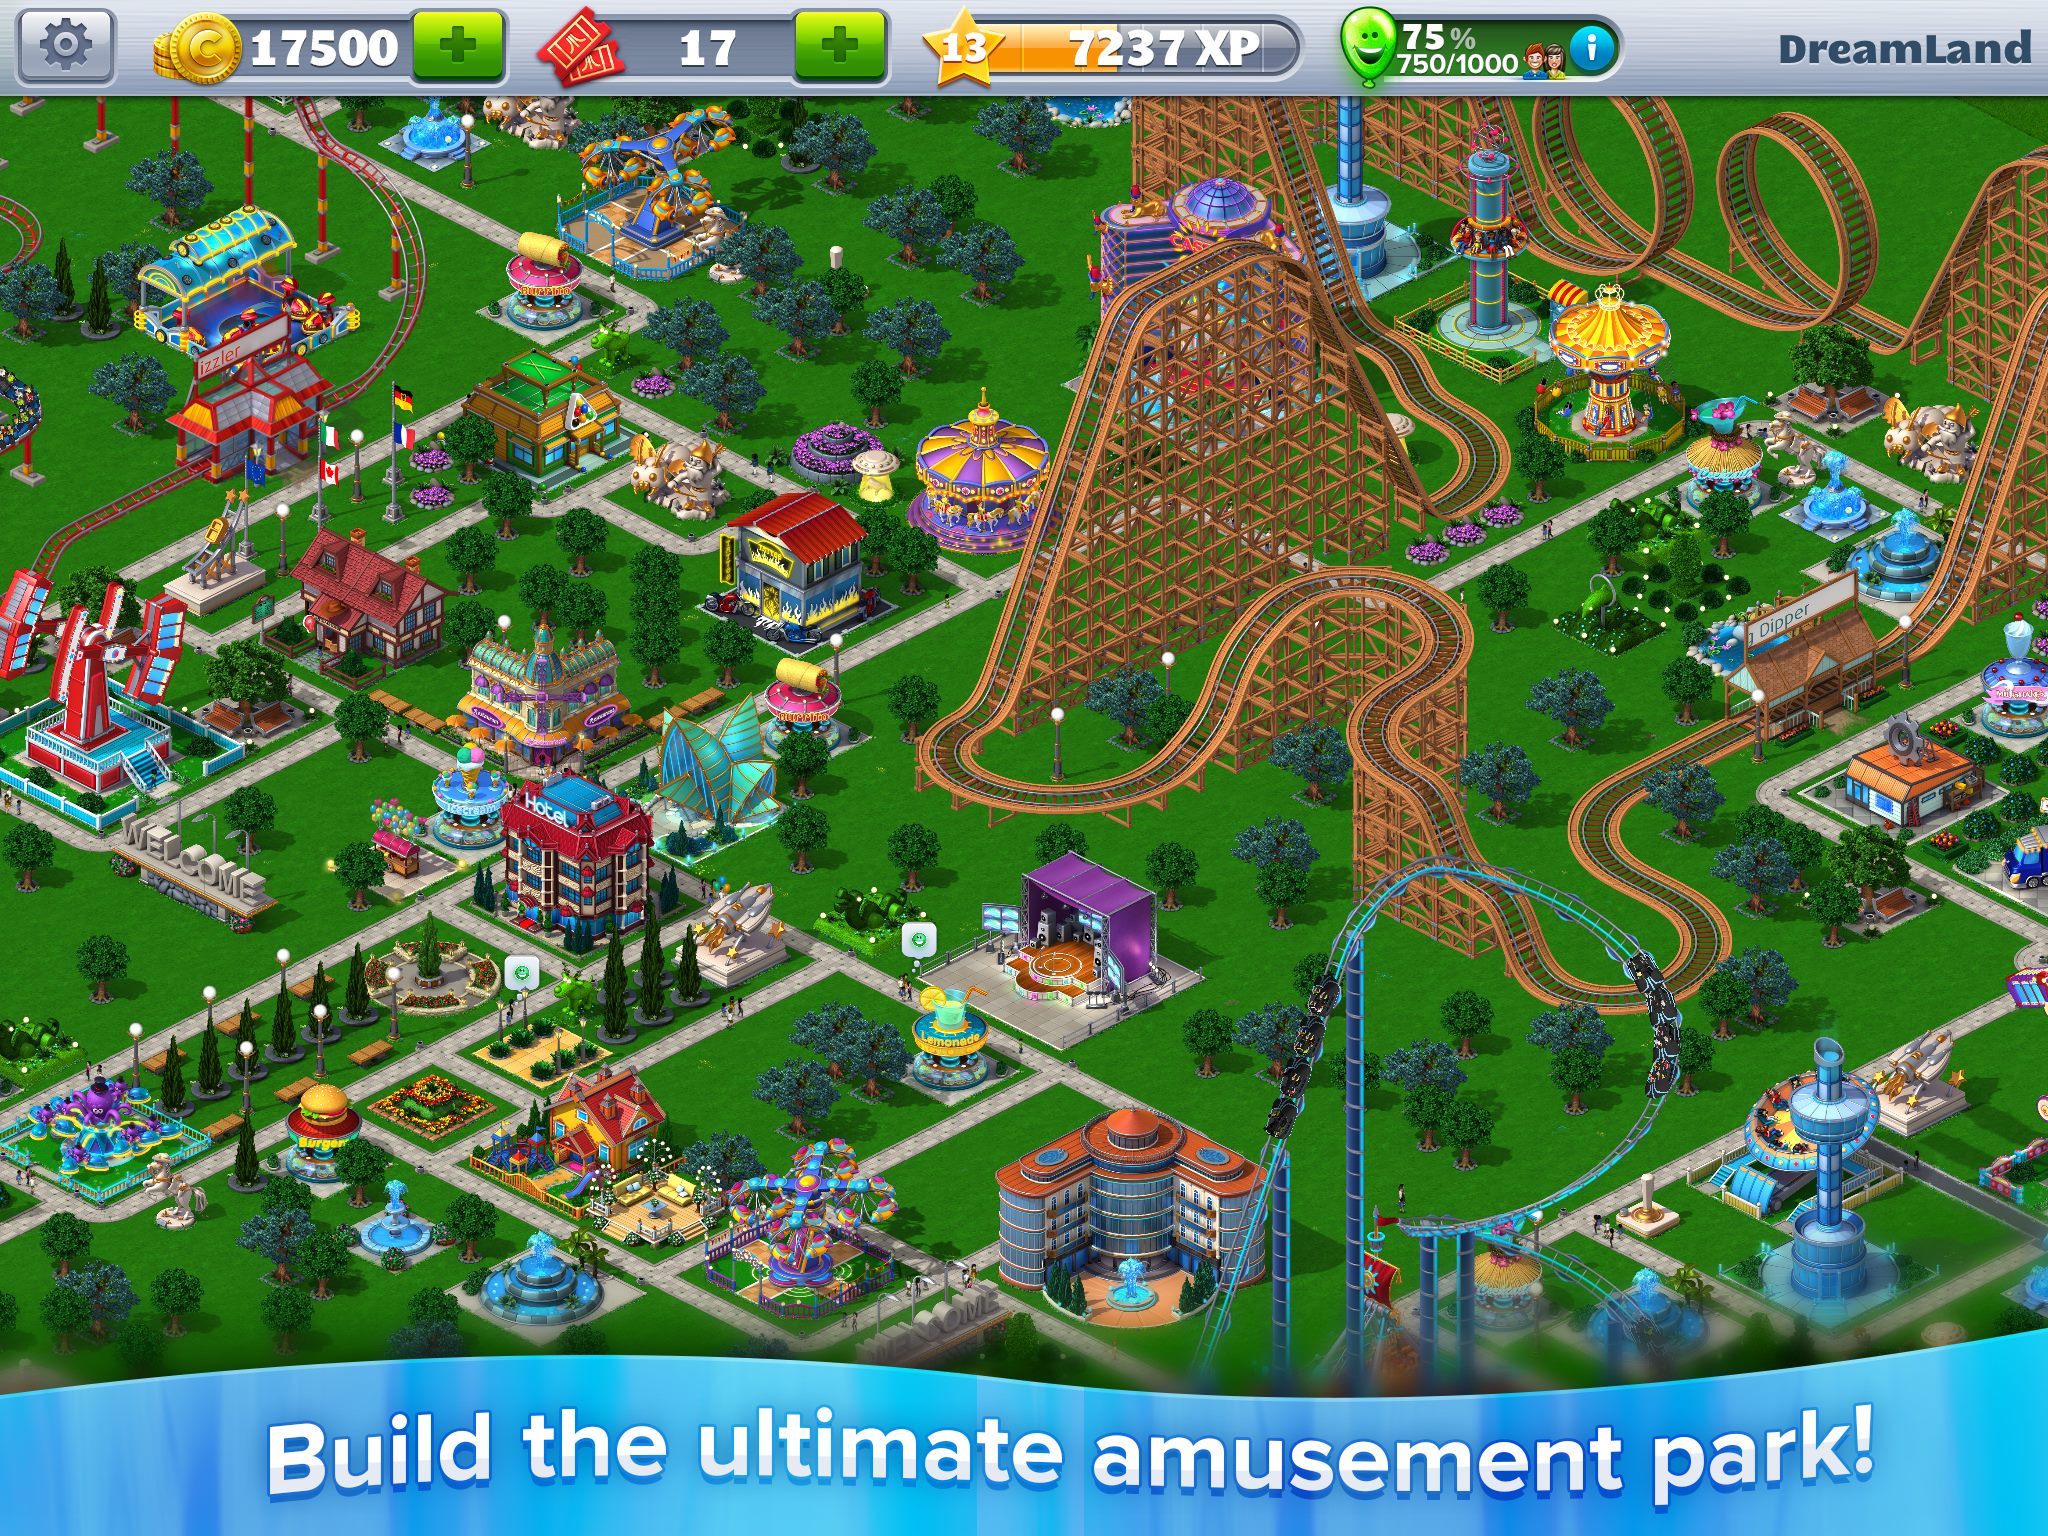 RollerCoaster Tycoon 3 - PC Review and Full Download